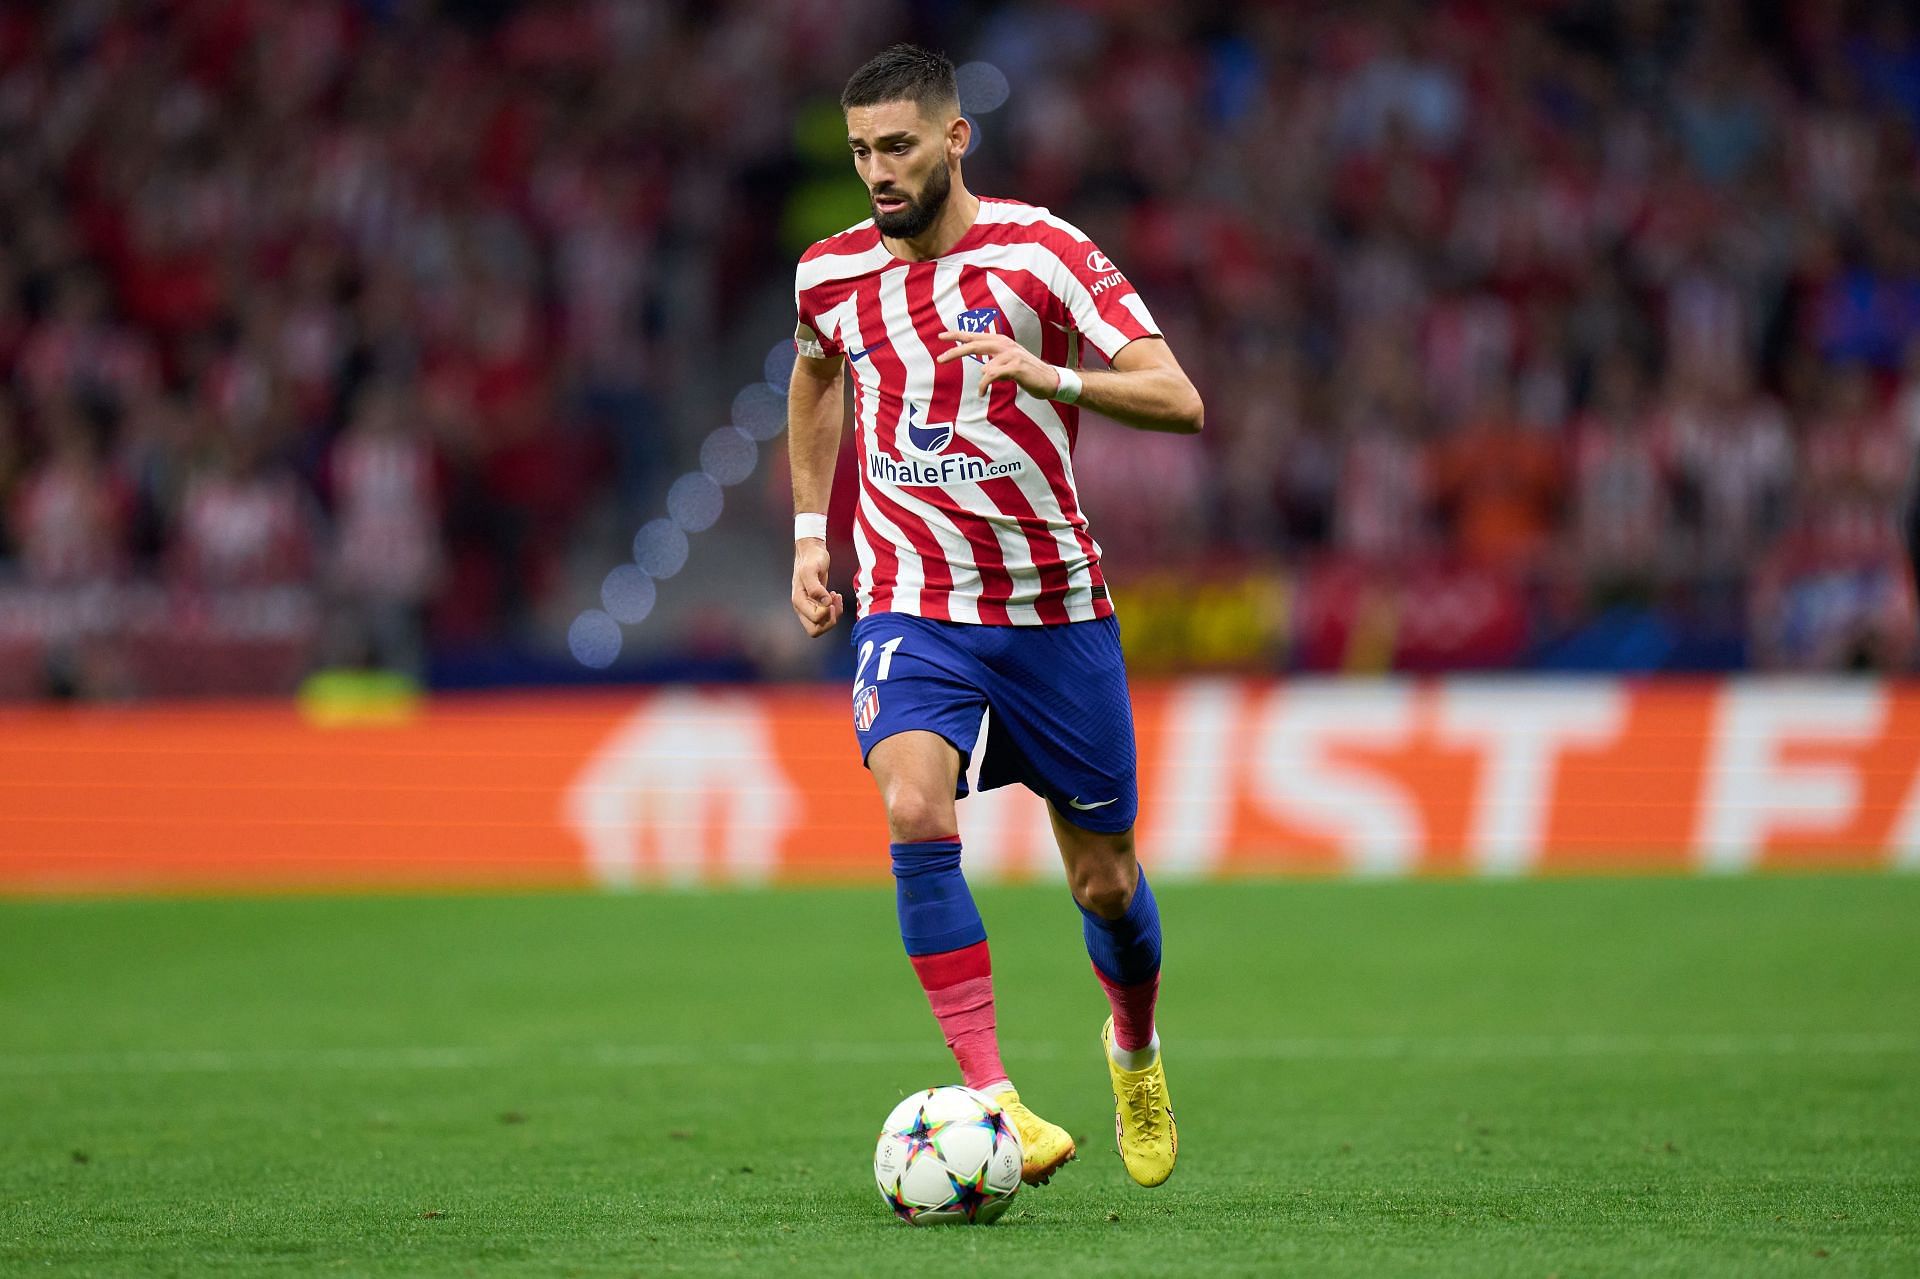 Yannick Carrasco is likely to leave the Wanda Metropolitano this year.